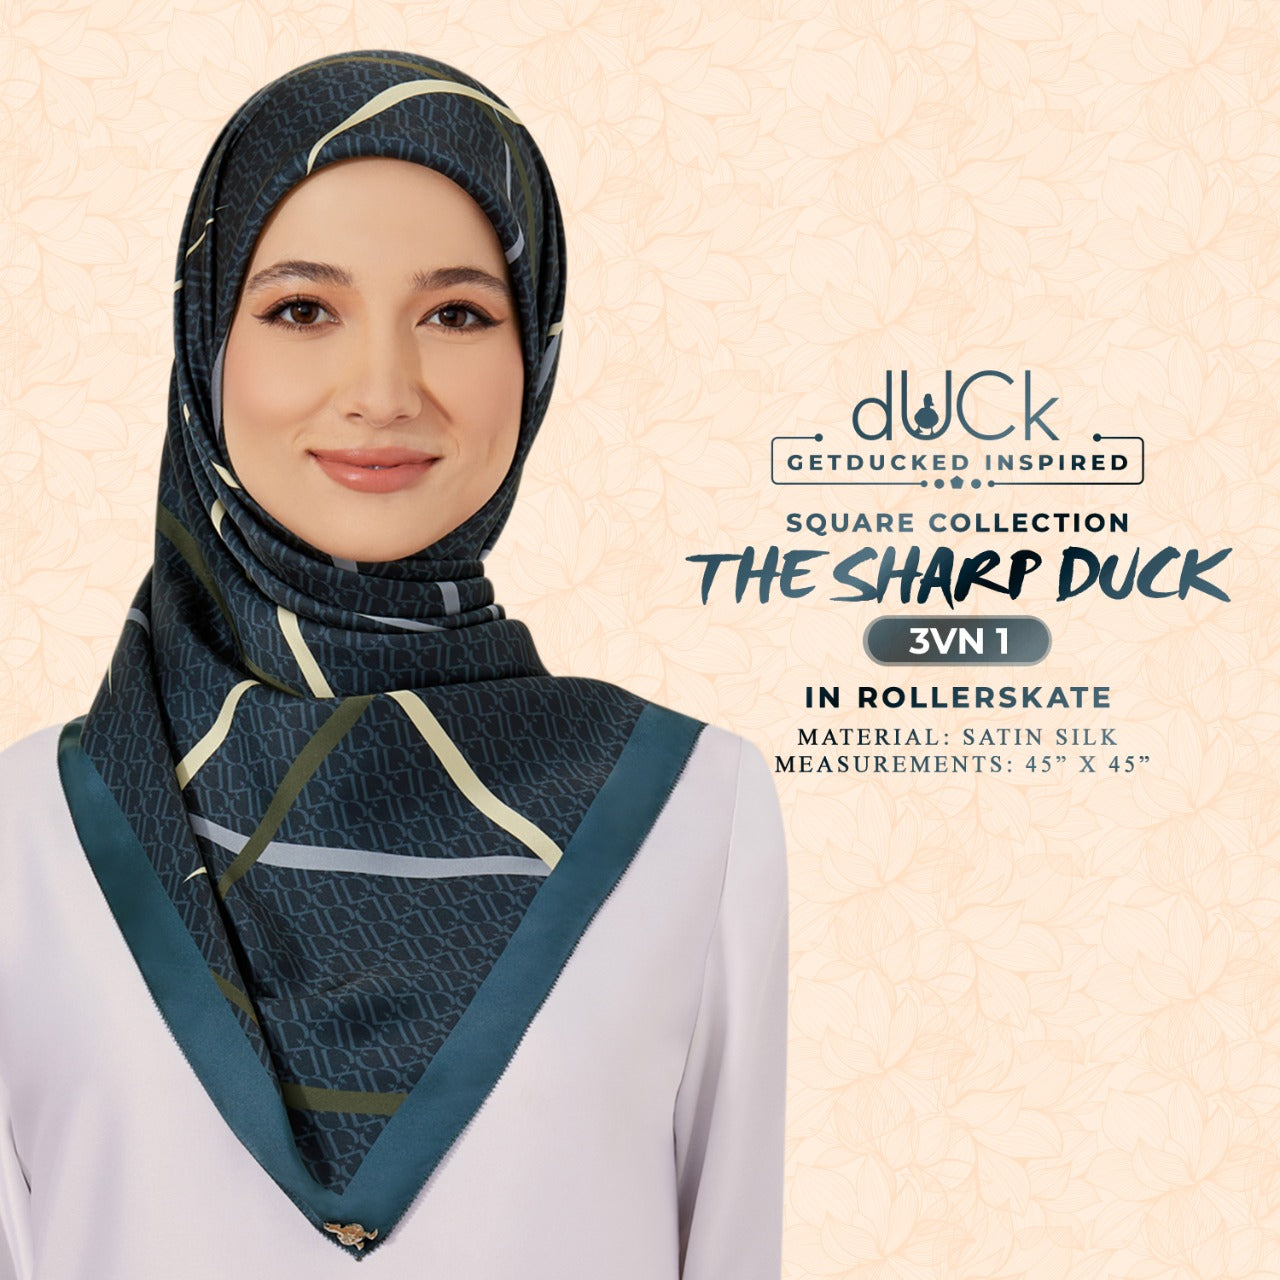 The Sharp dUCk Inspired Square Collection